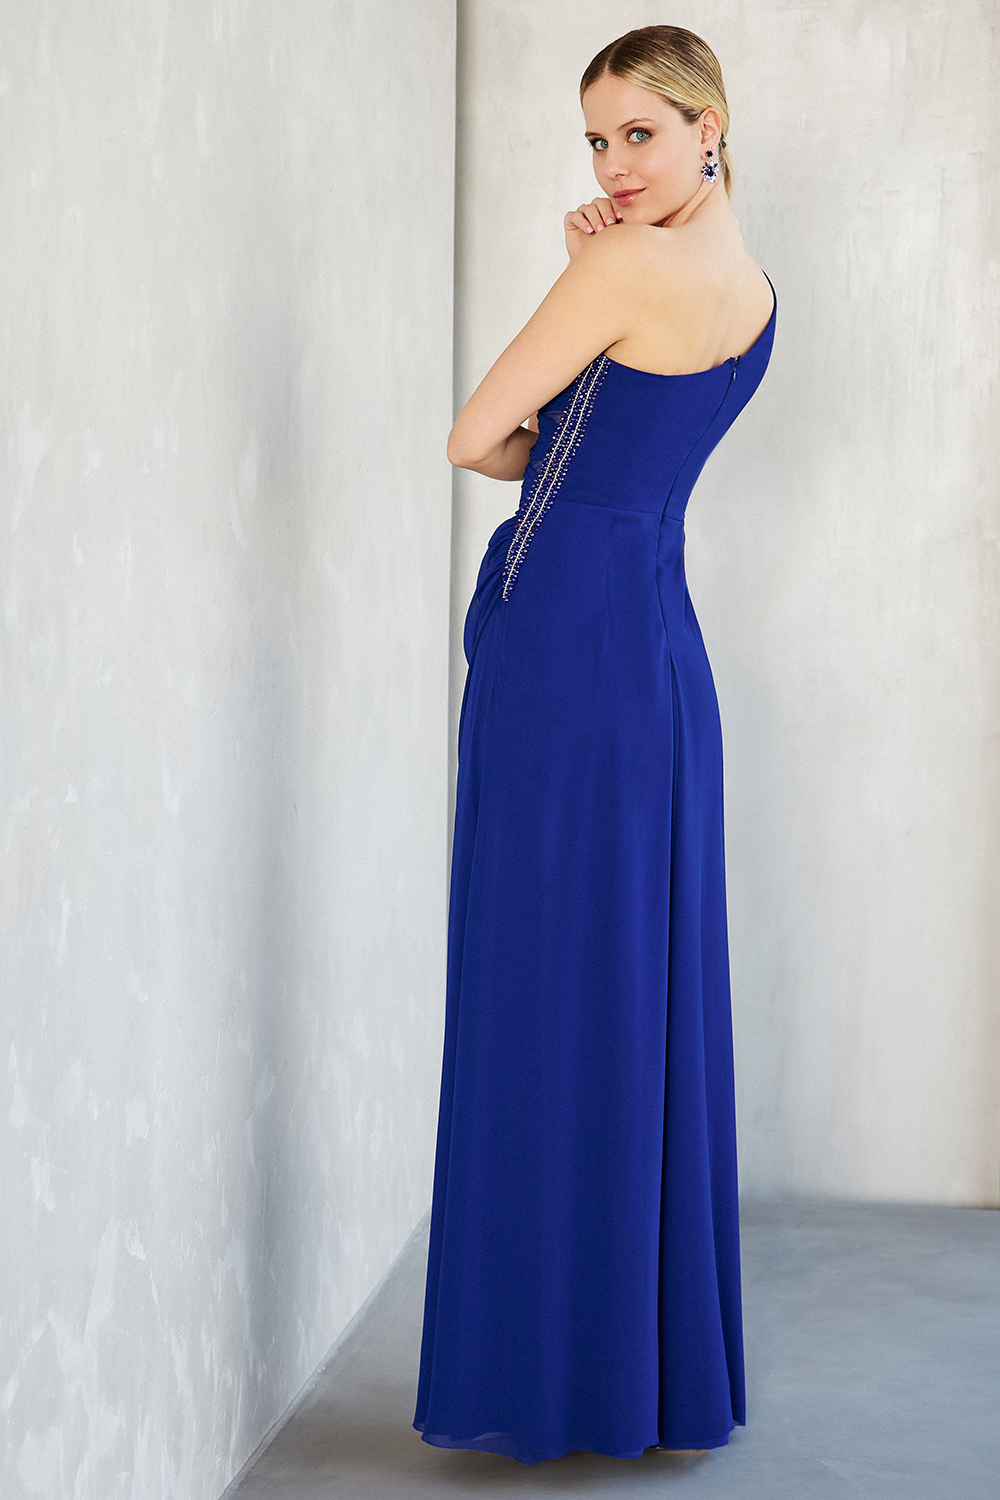 Evening Dresses / One shoulder long evening dress with chiffon fabric and beading